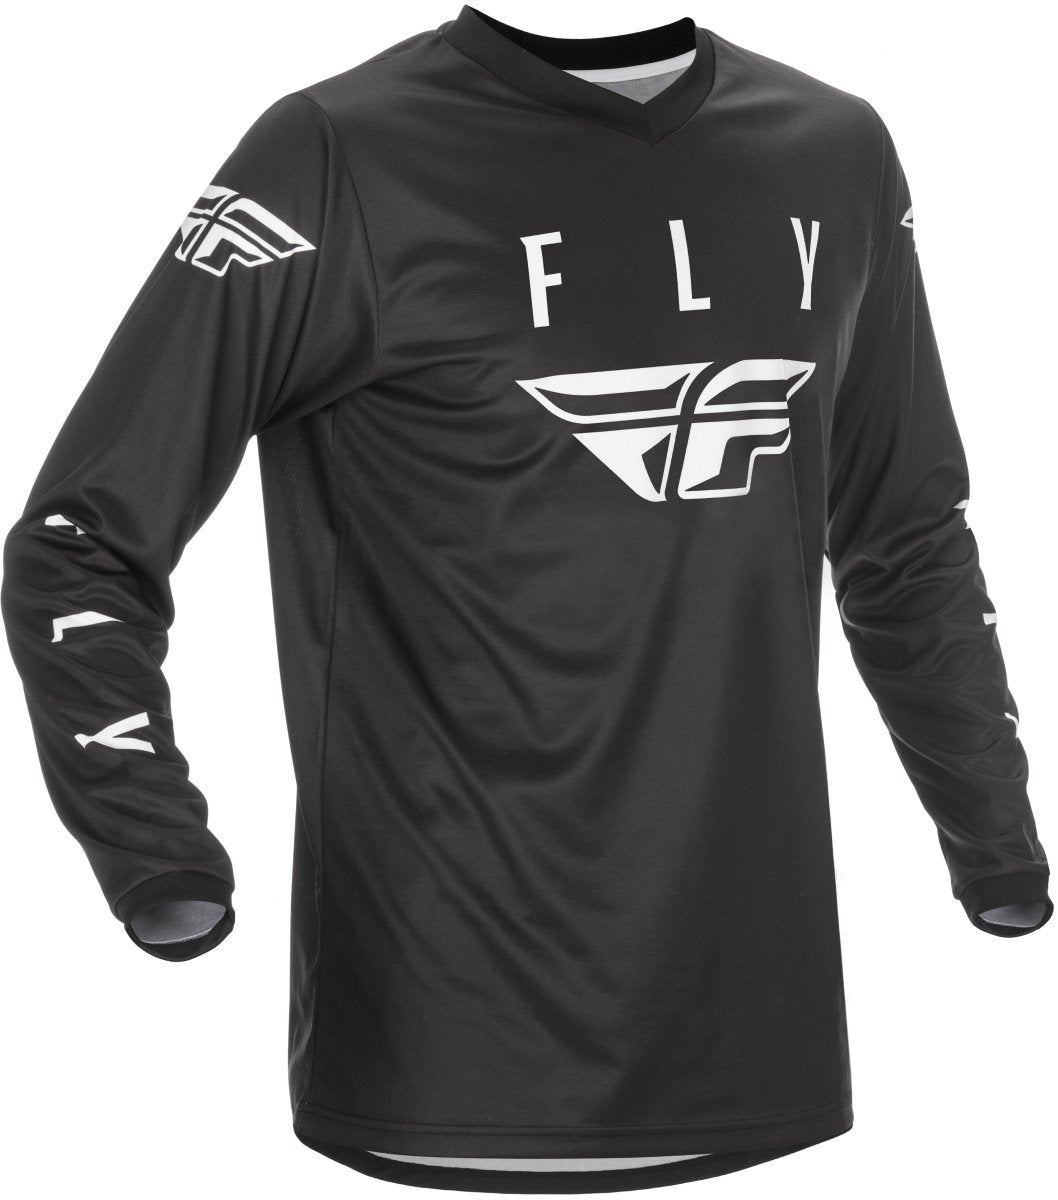 FLY RACING - YOUTH FLY UNIVERSAL JERSEY - 374-991YX - 191361248283